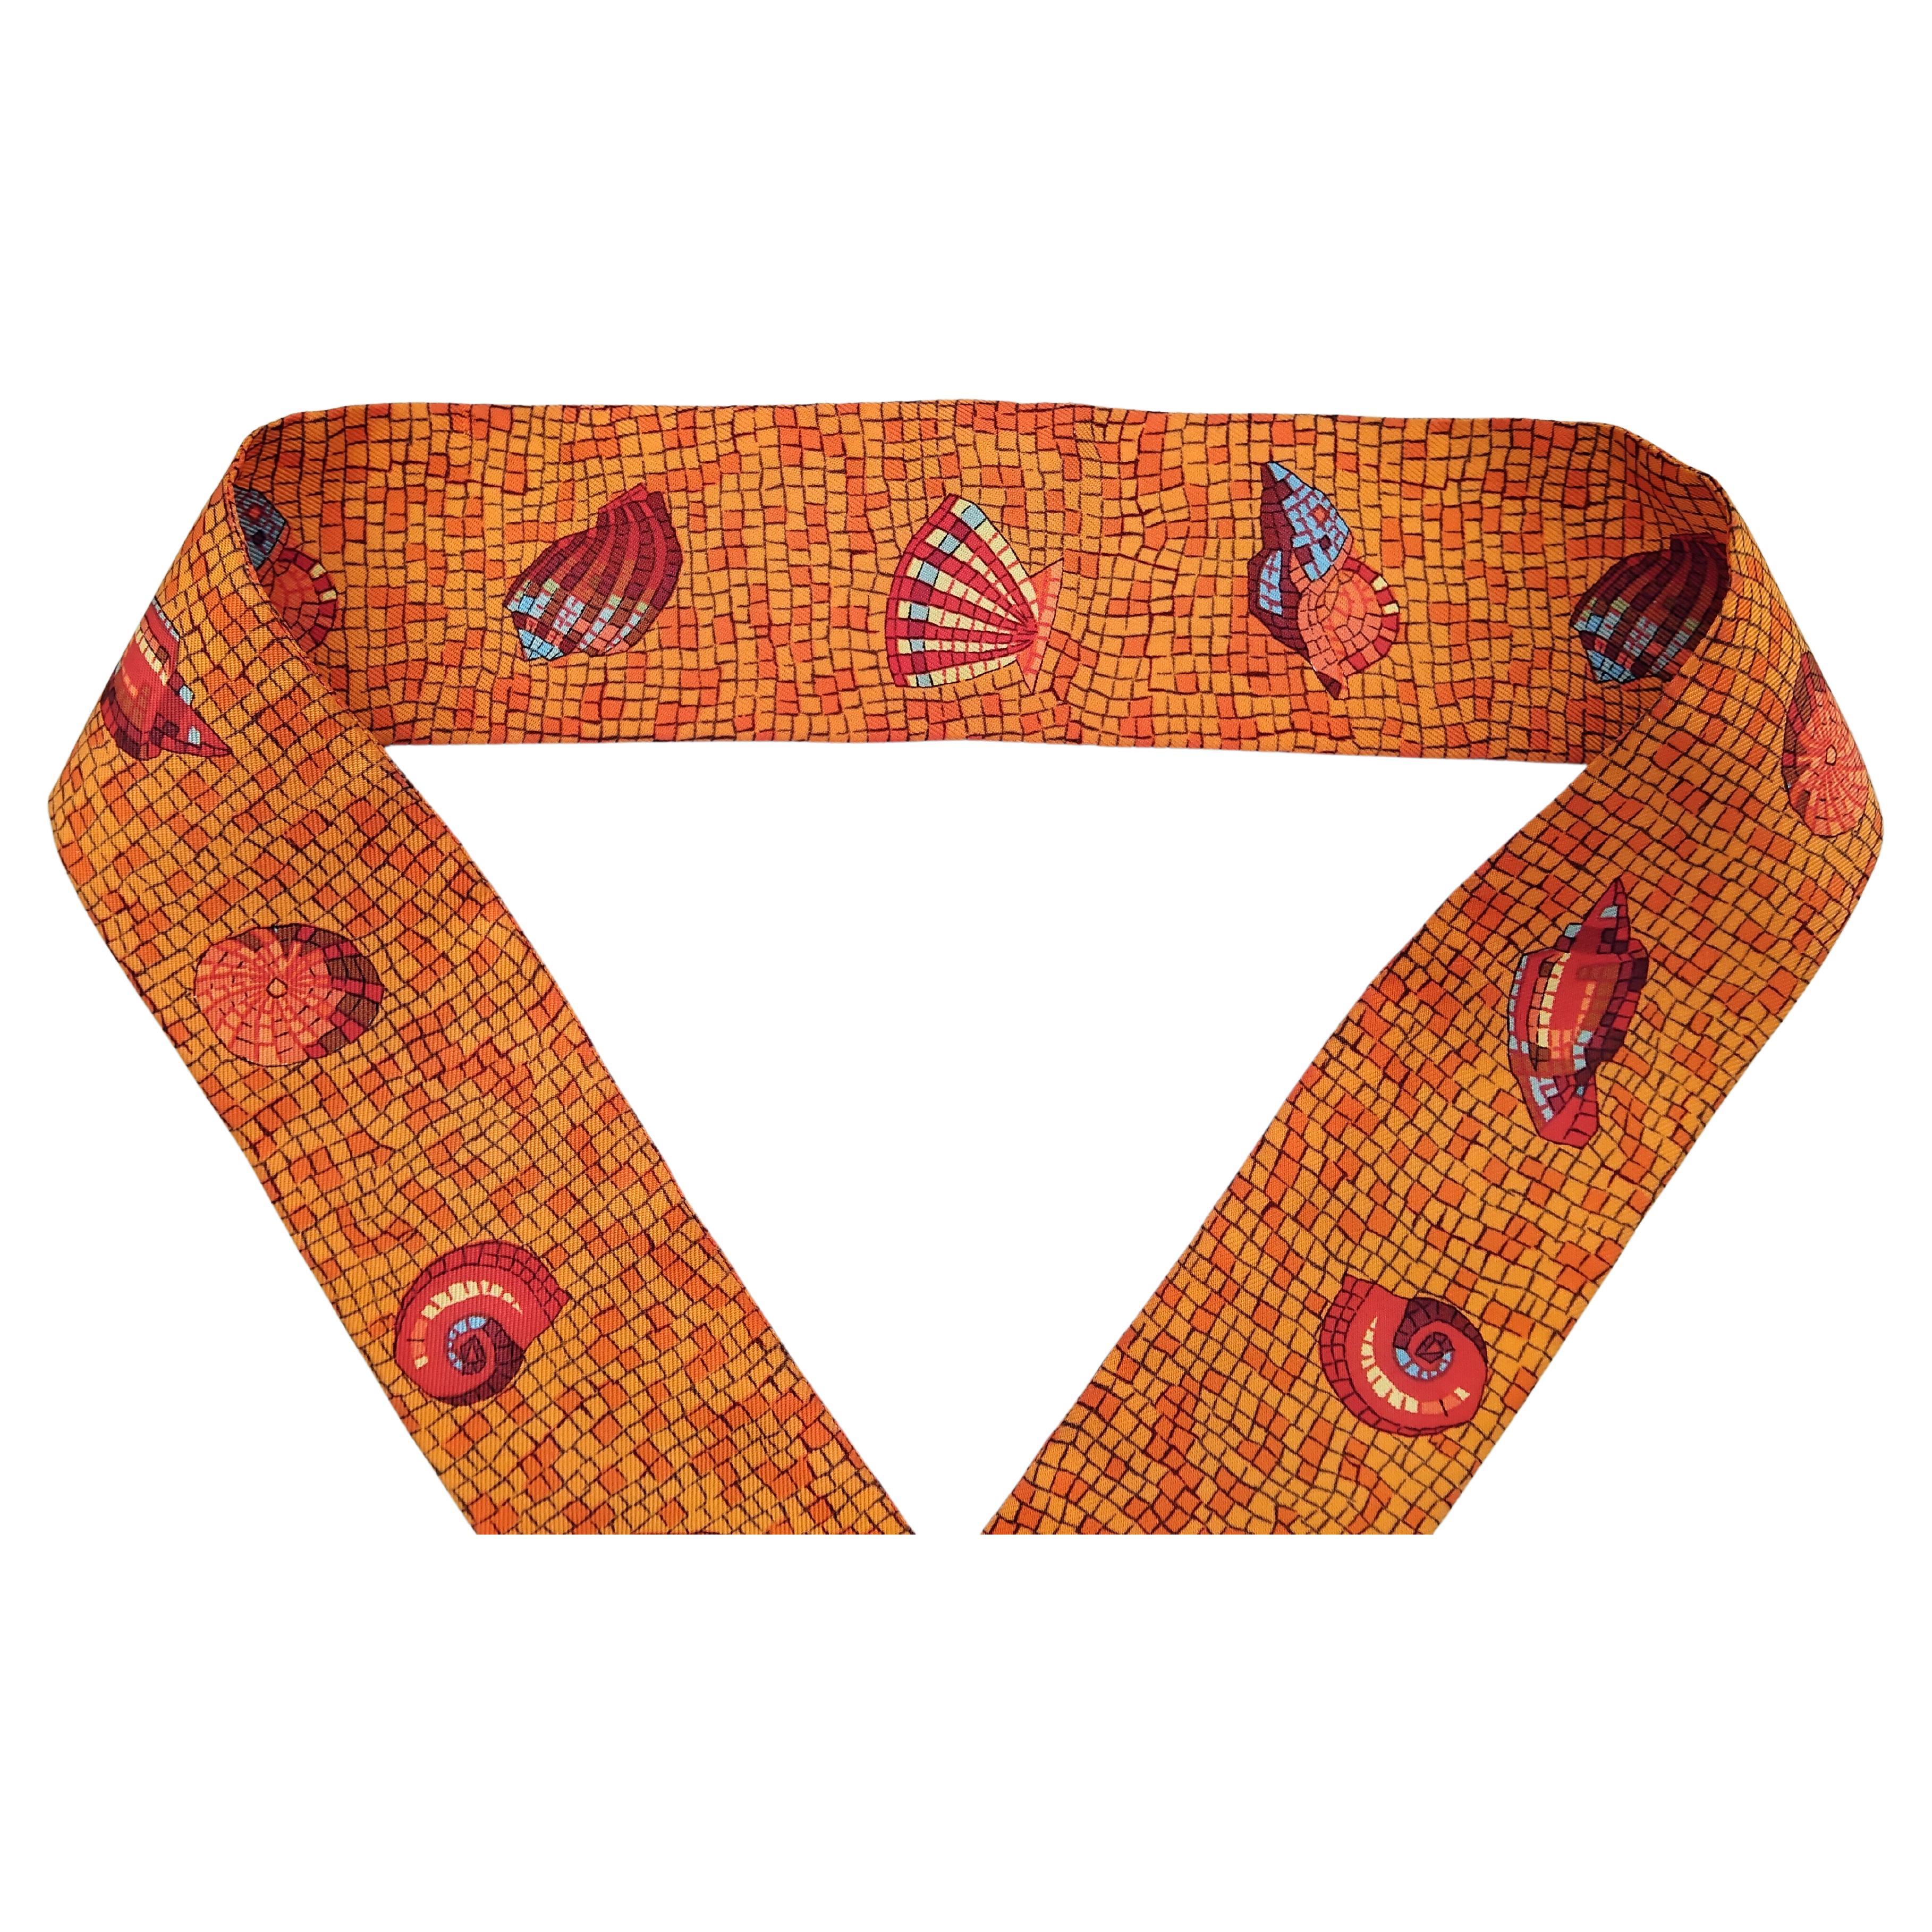 Rare opportunity to get this lovely authentic Hermès twilly

Print: 